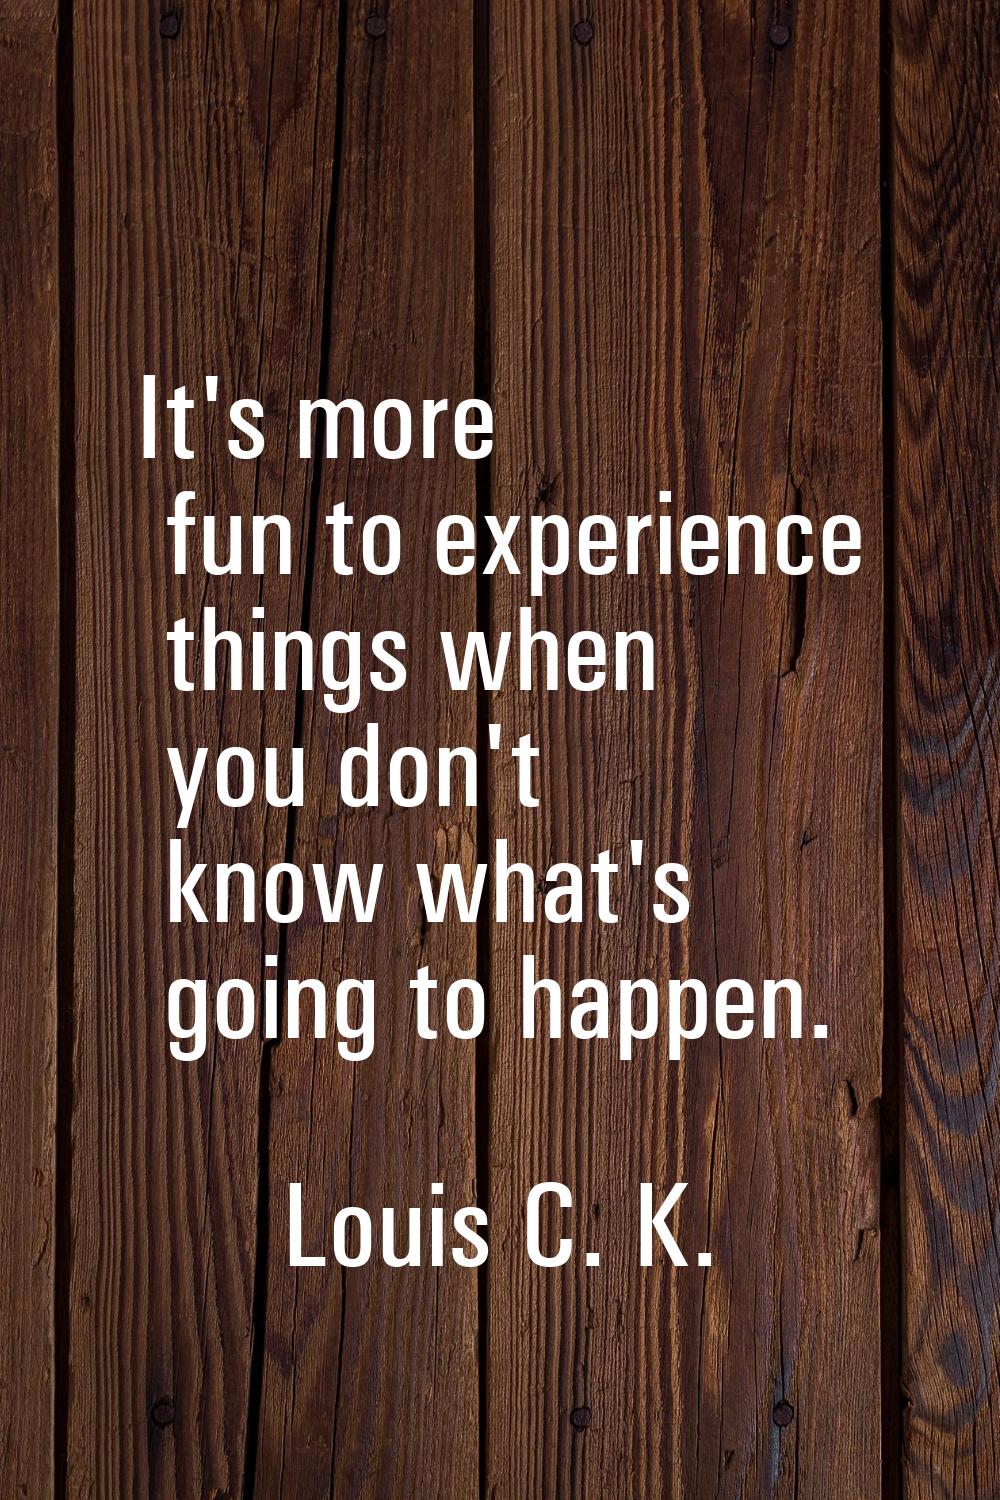 It's more fun to experience things when you don't know what's going to happen.